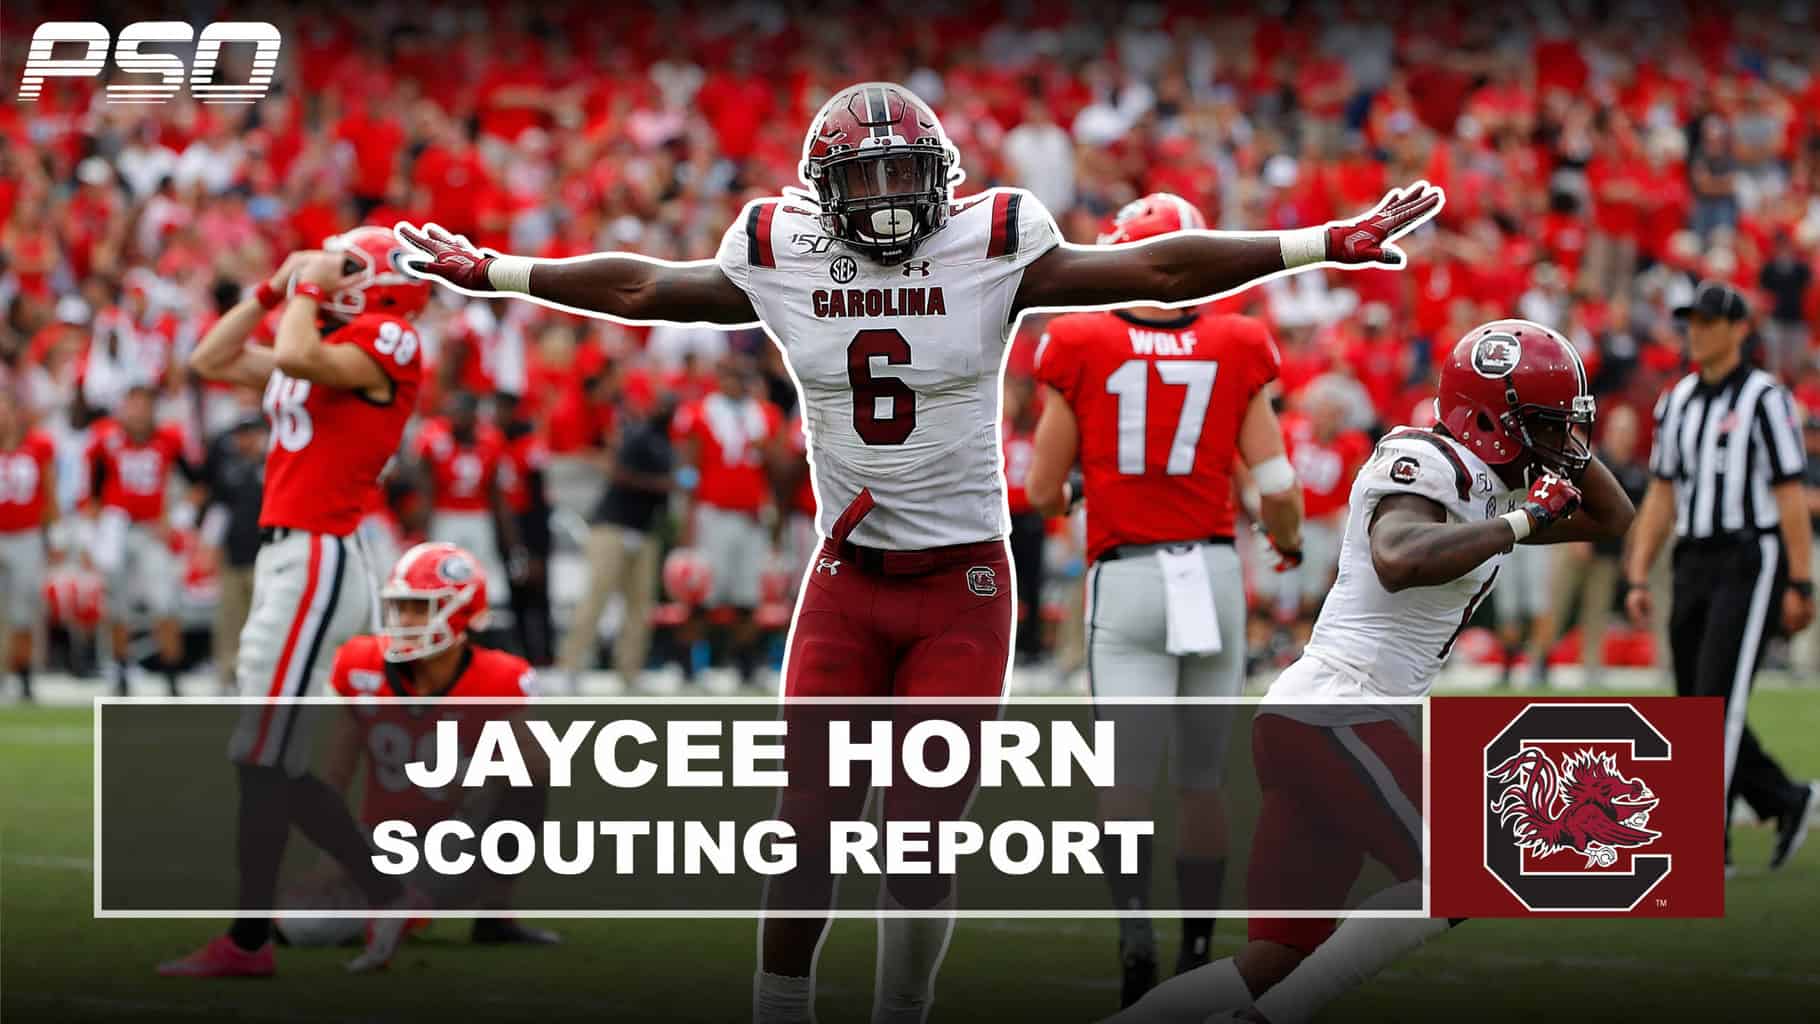 CB Jaycee Horn's NFL Draft stock on the rise with impressive pro day